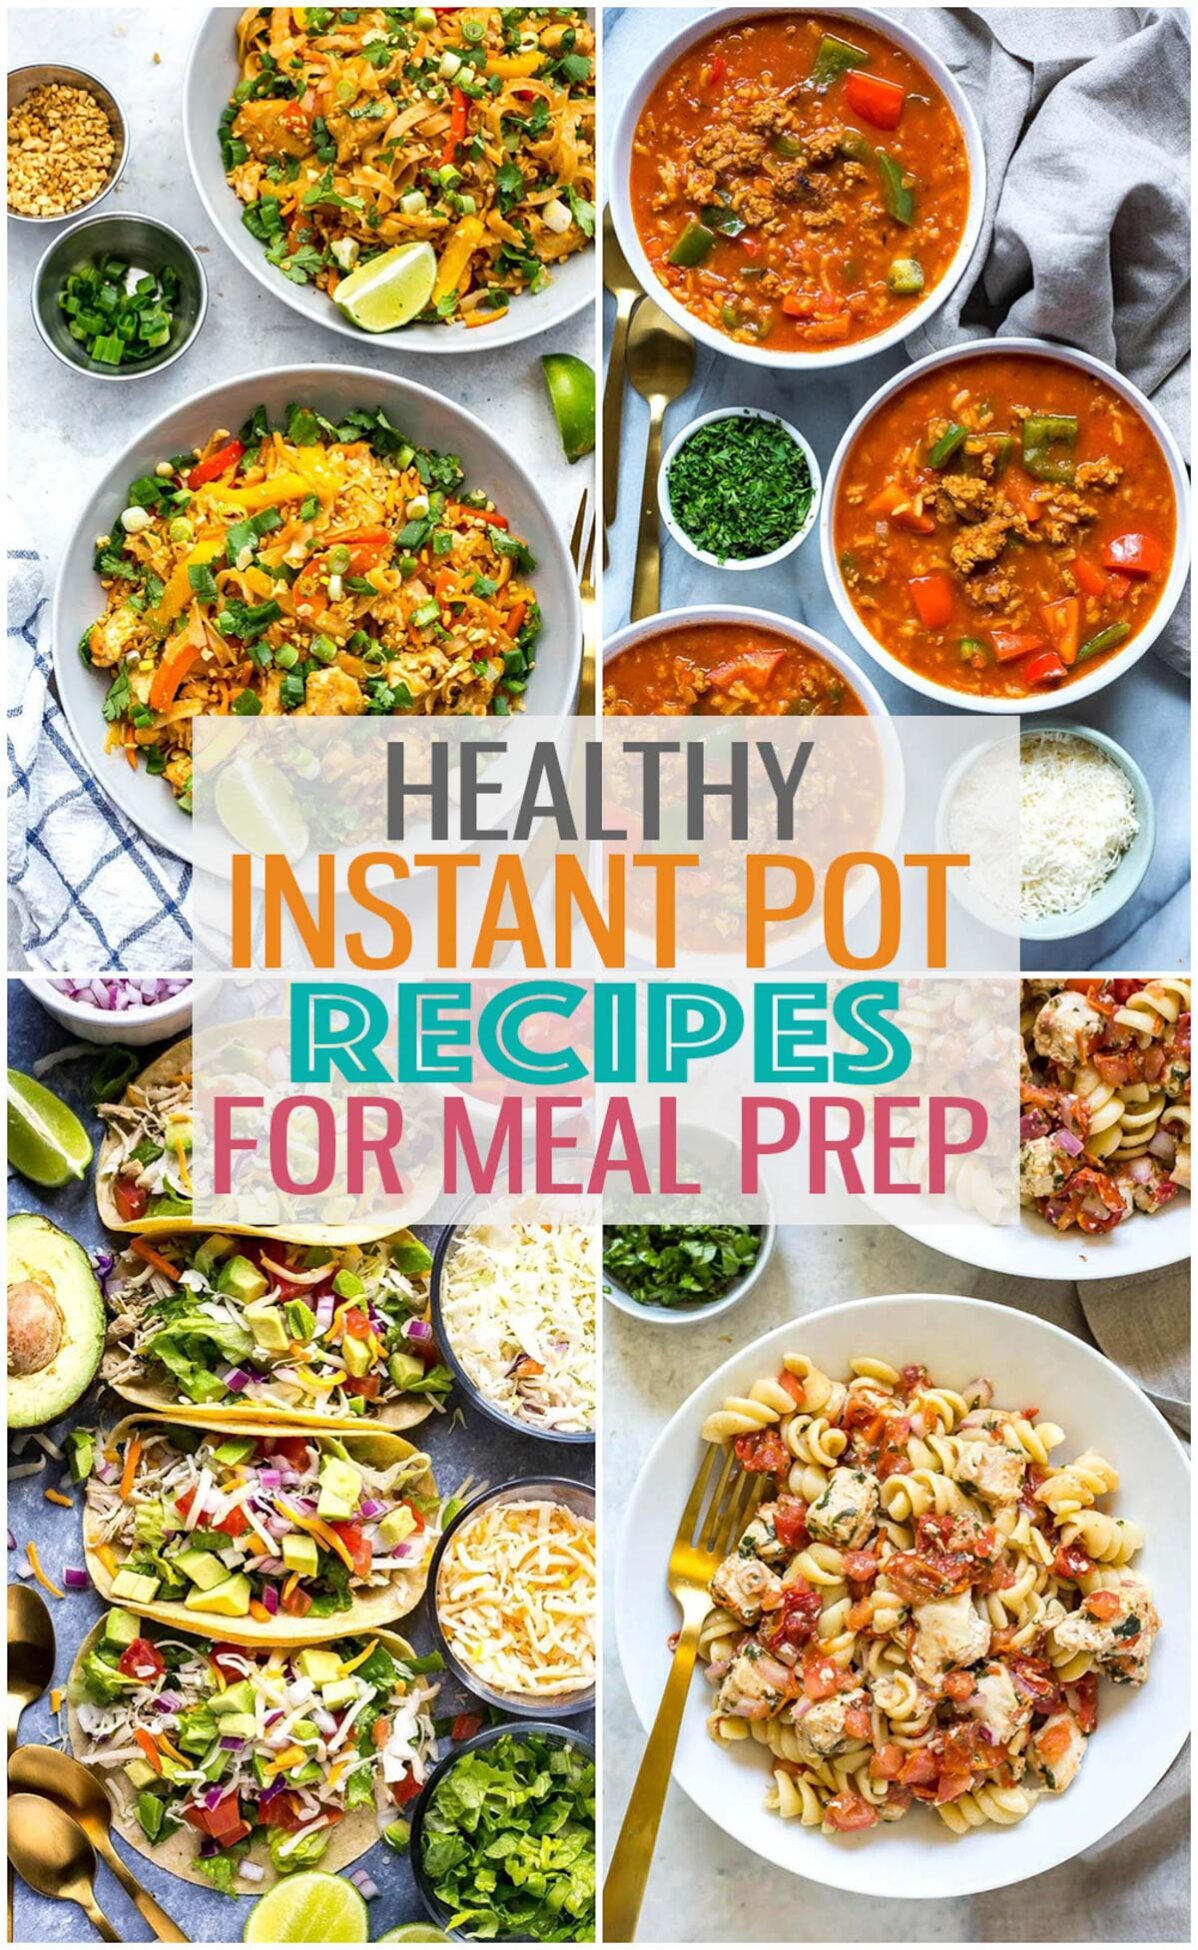 A collage with four different recipes with the text "Healthy Instant Pot Recipes" layered over top.